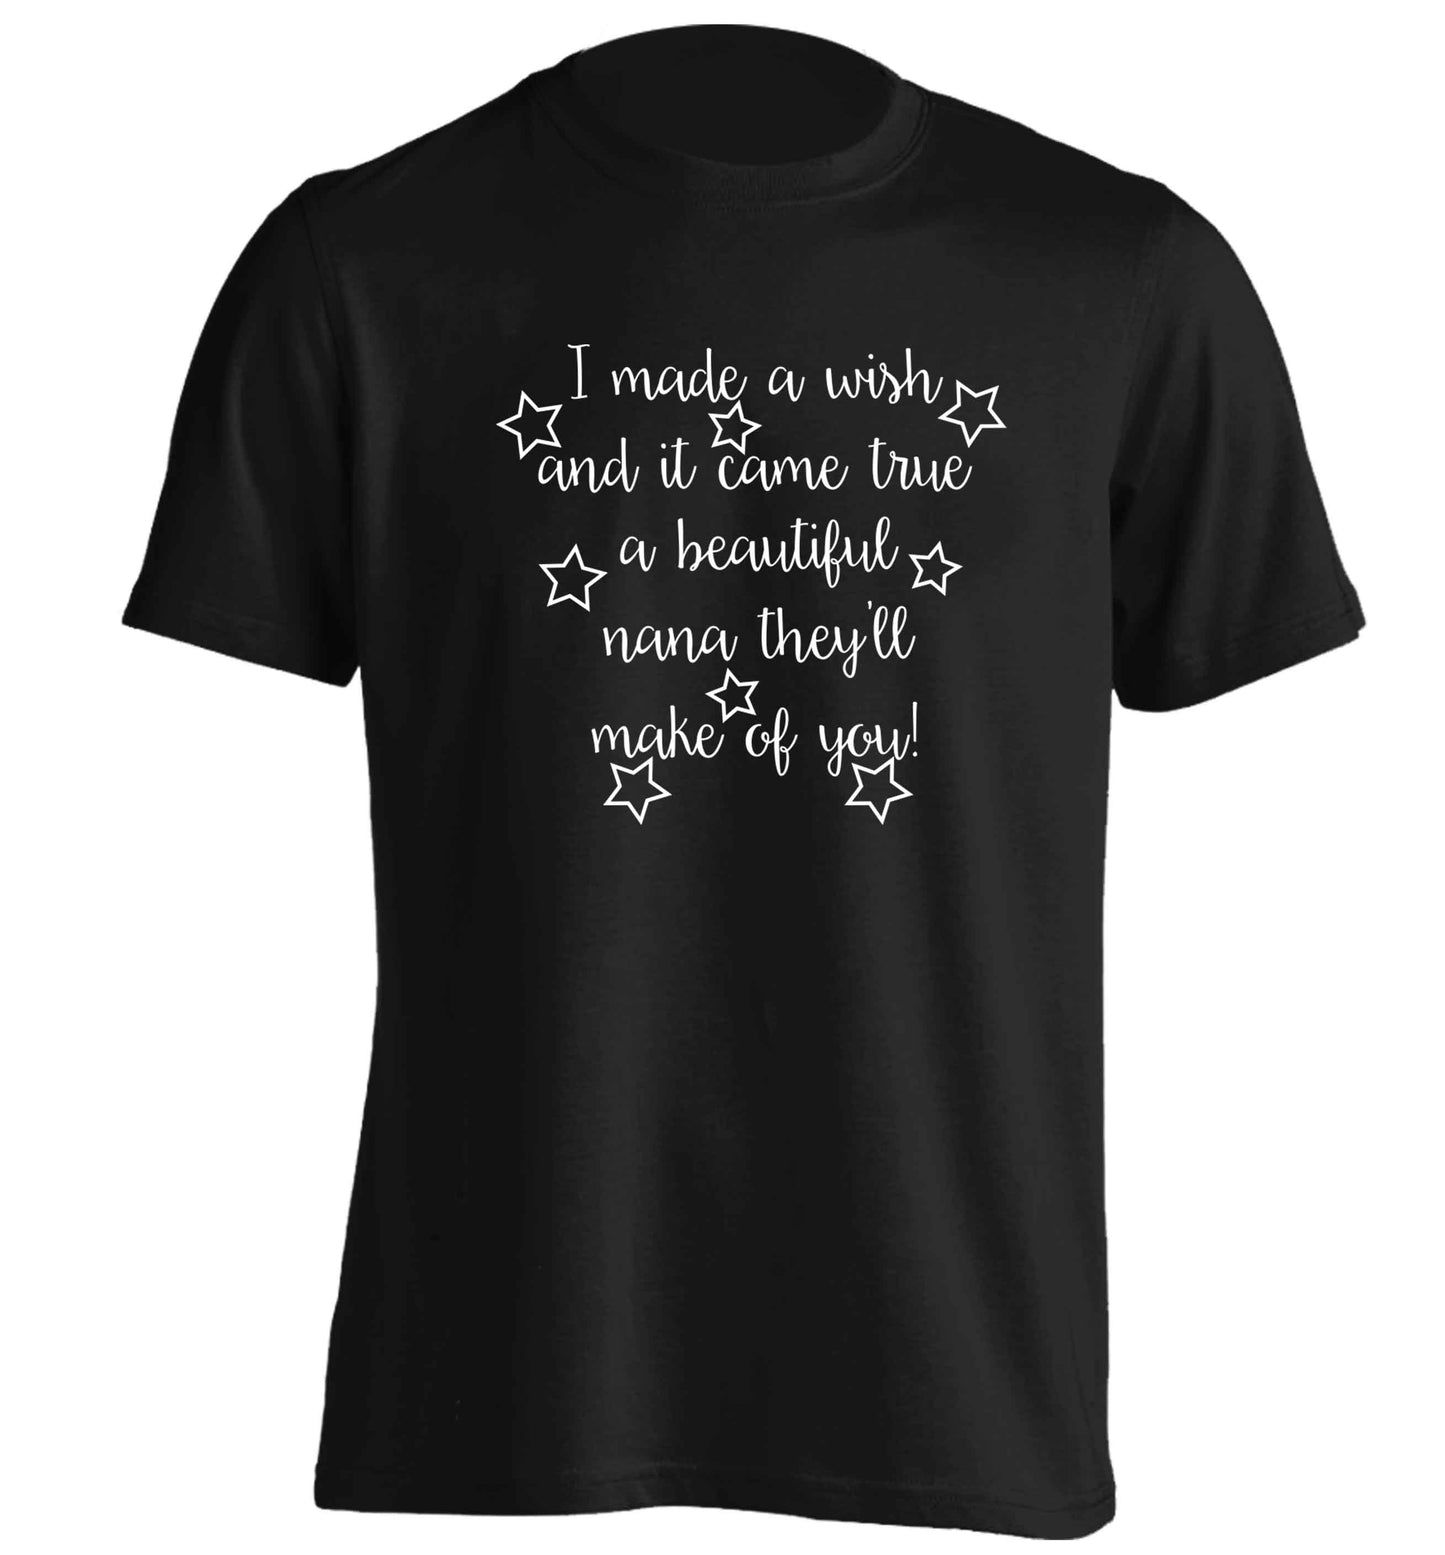 I made a wish and it came true a beautiful nana they'll make of you! adults unisex black Tshirt 2XL